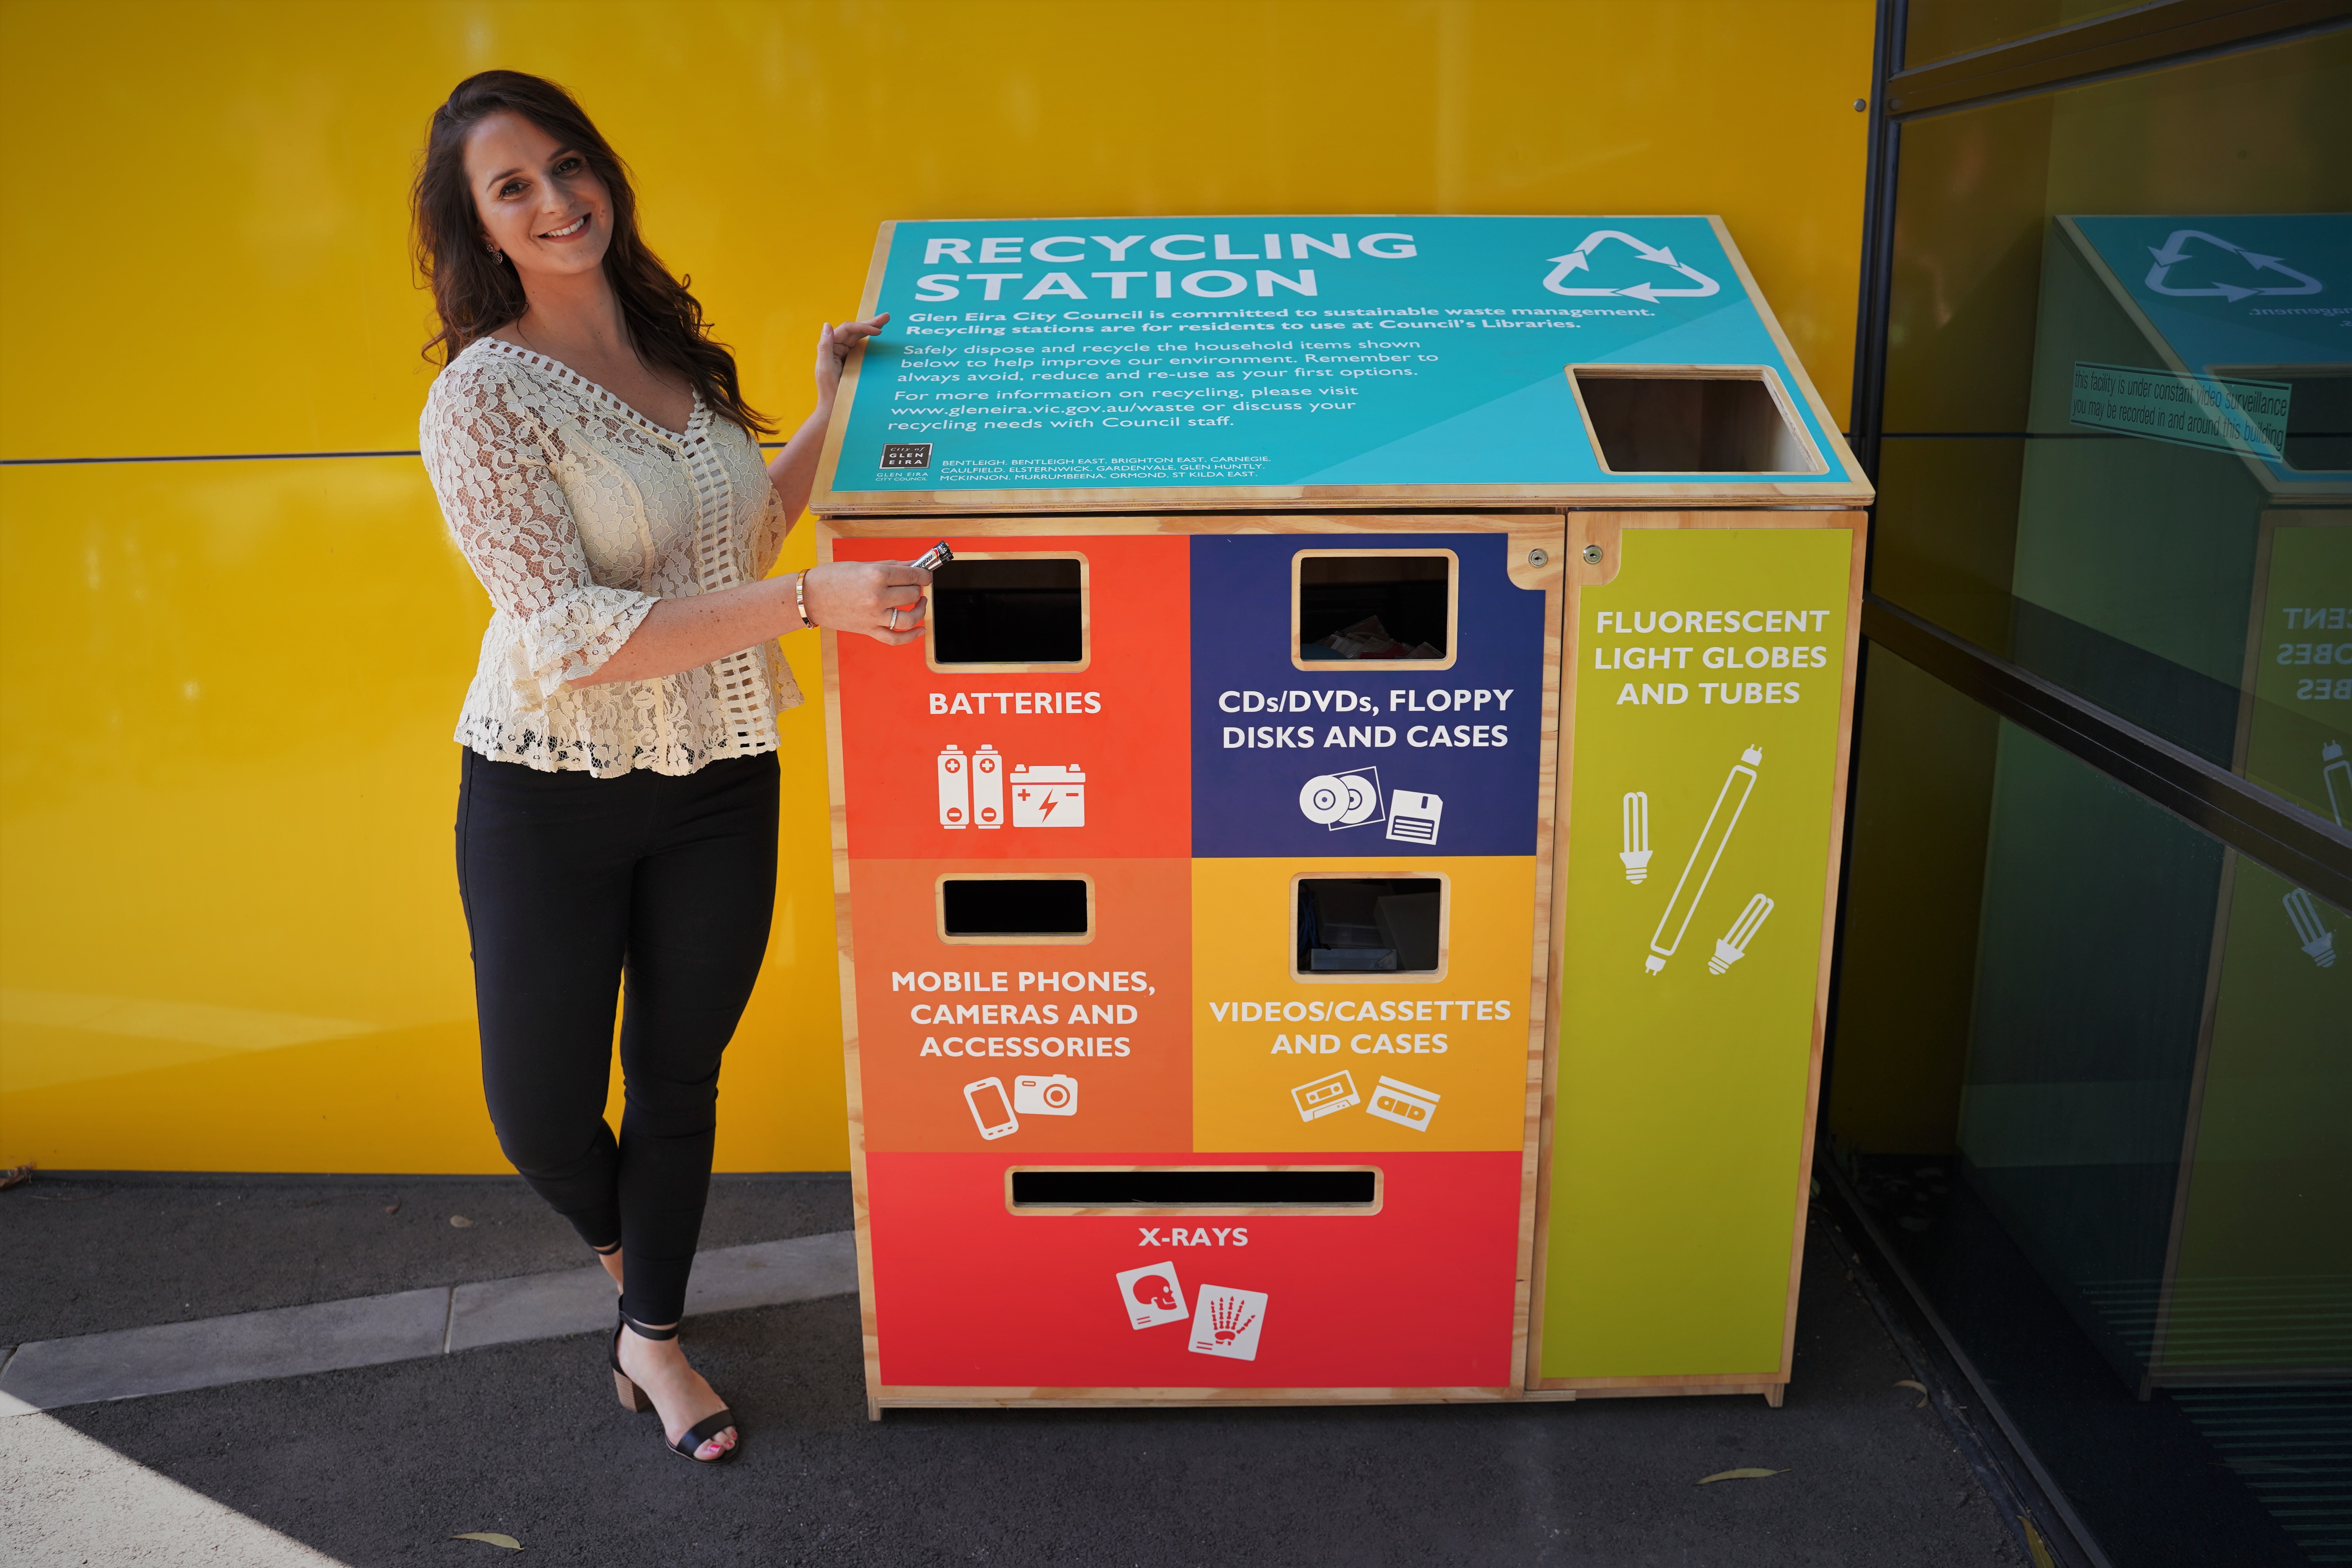 Community member recycles batteries in the E-waste recycling station at a Glen Eira Library